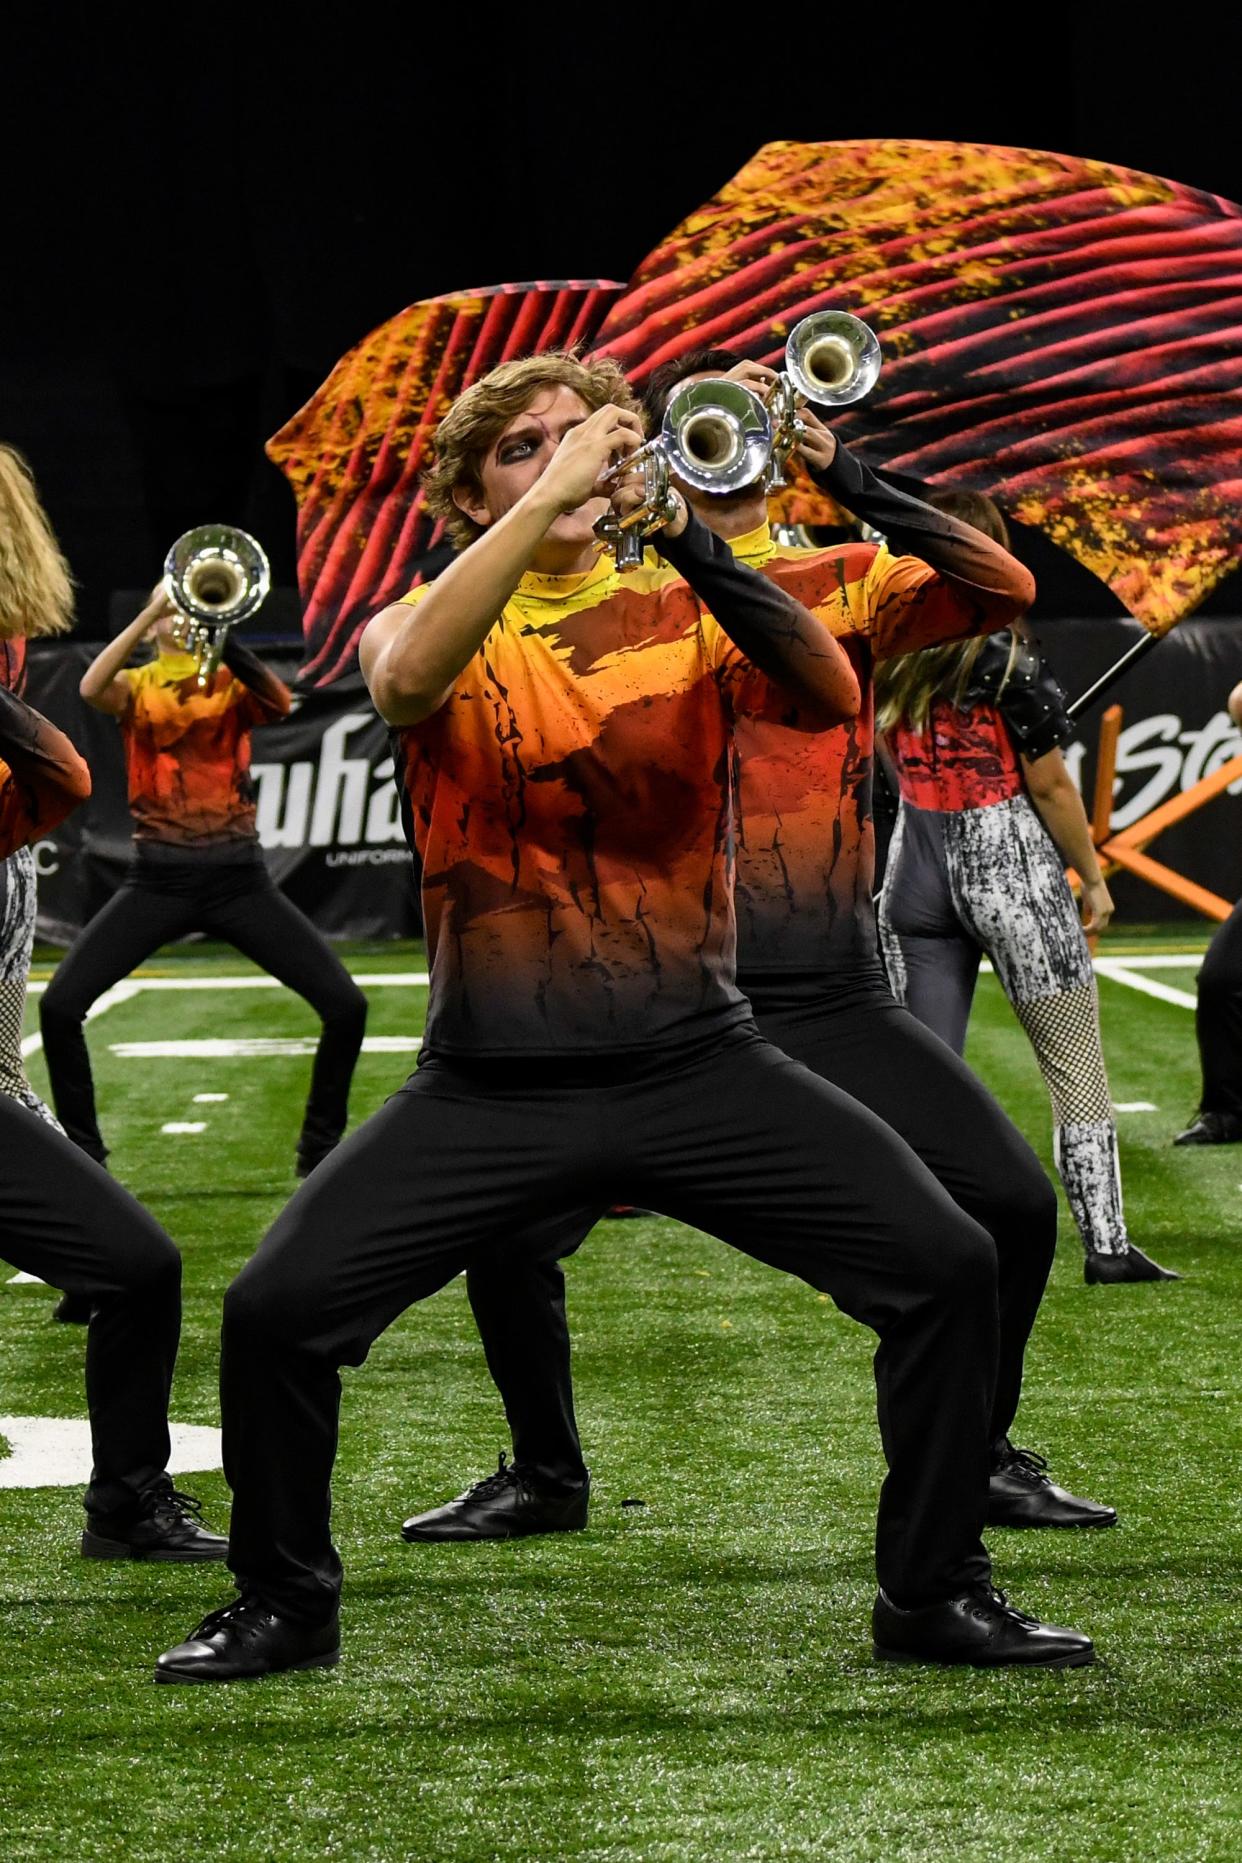 The Cincinnati Tradition Corps will be among the squads performing at the 25th annual Summer Music Games in July.